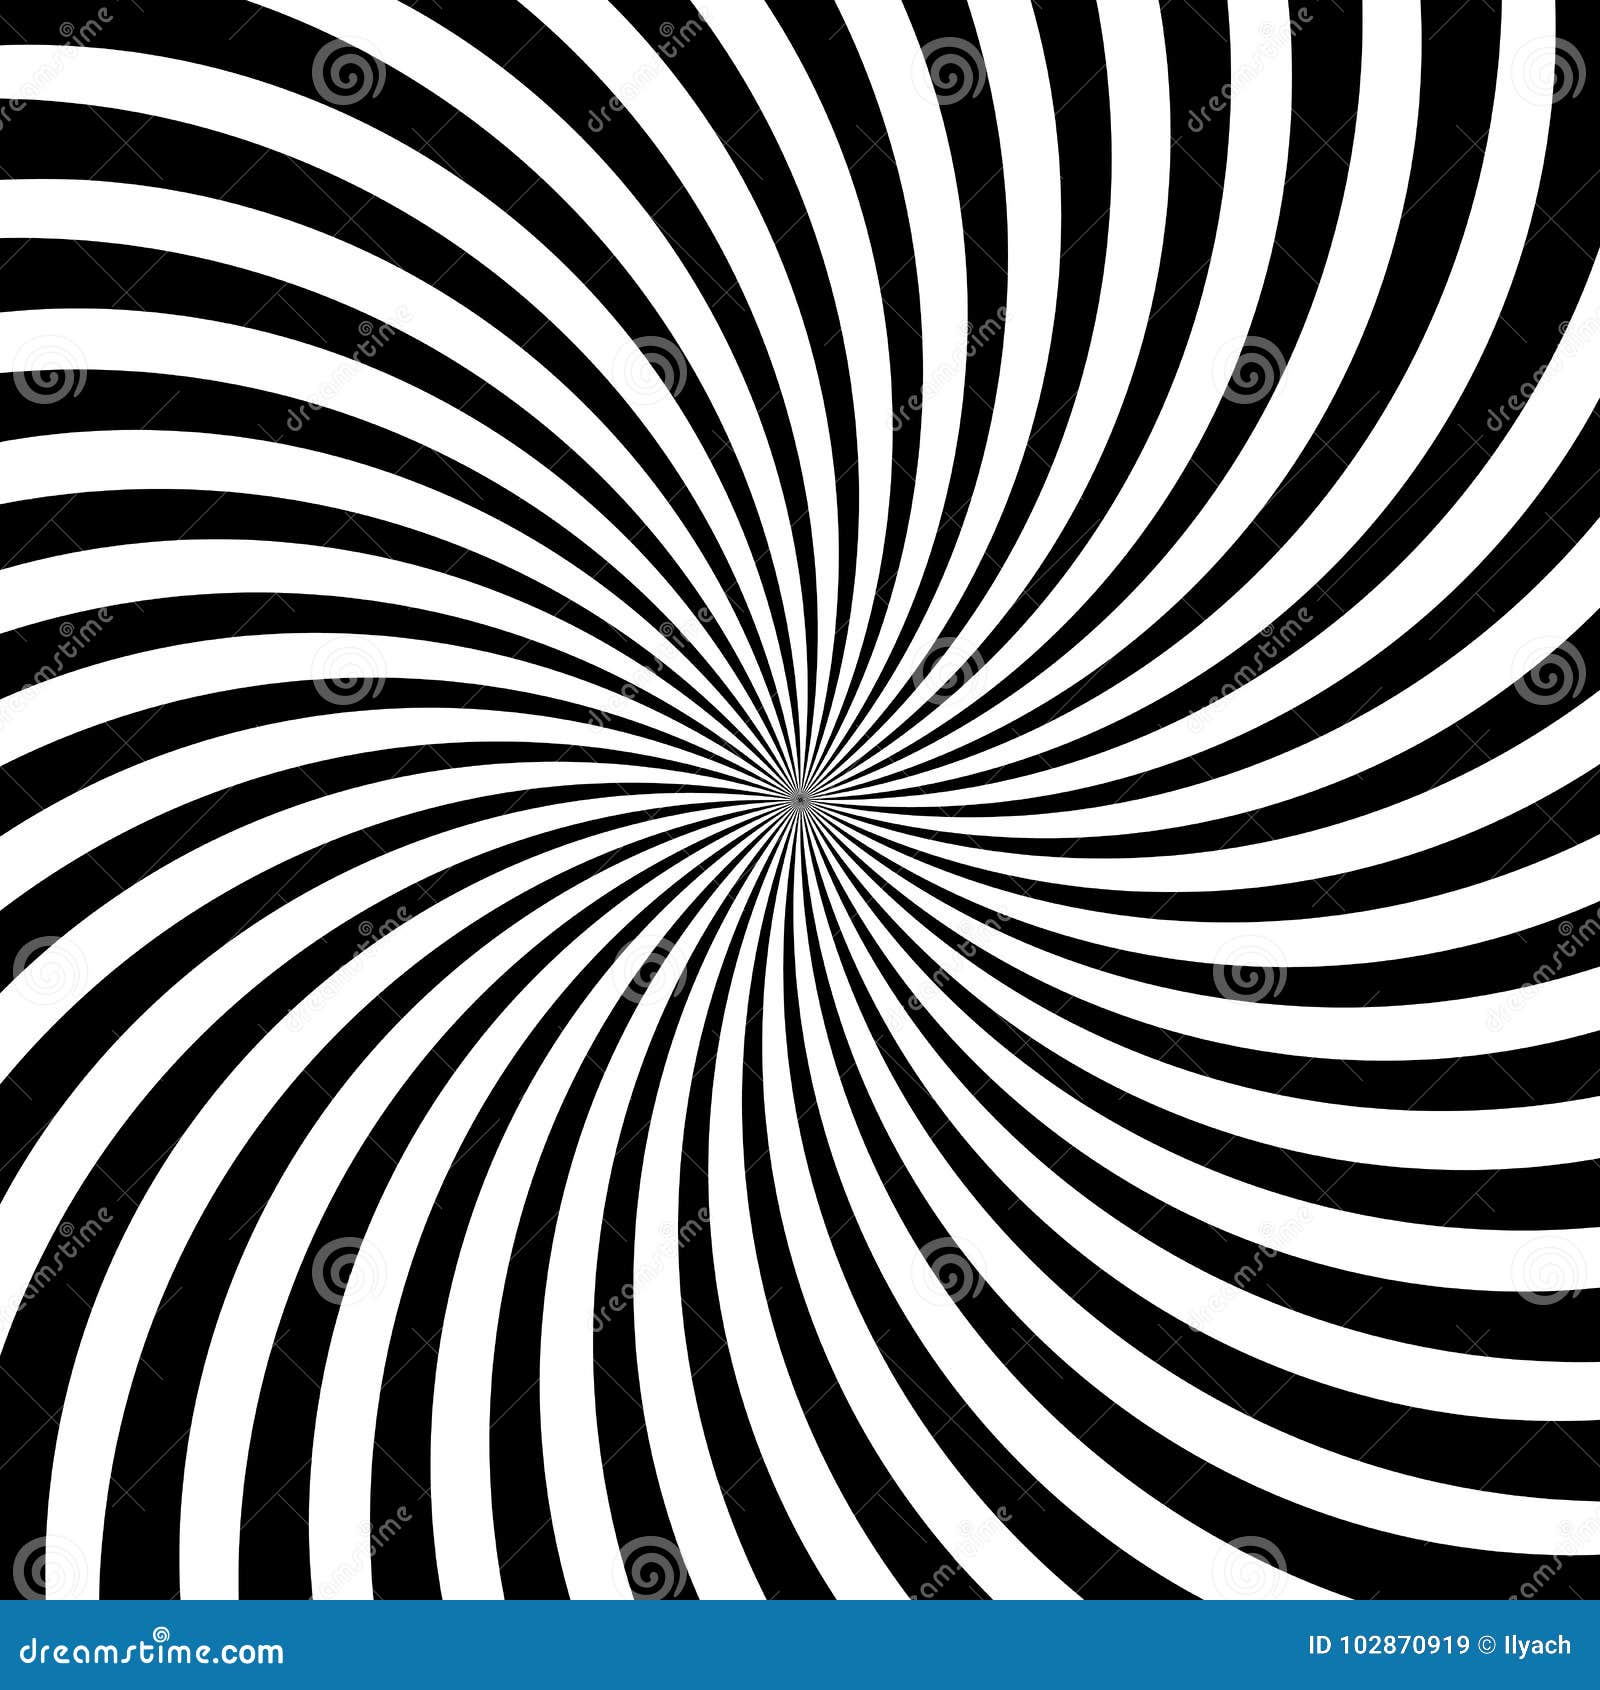 Hypnotic Swirl Lines Abstract White Black Optical Illusion Vector ...